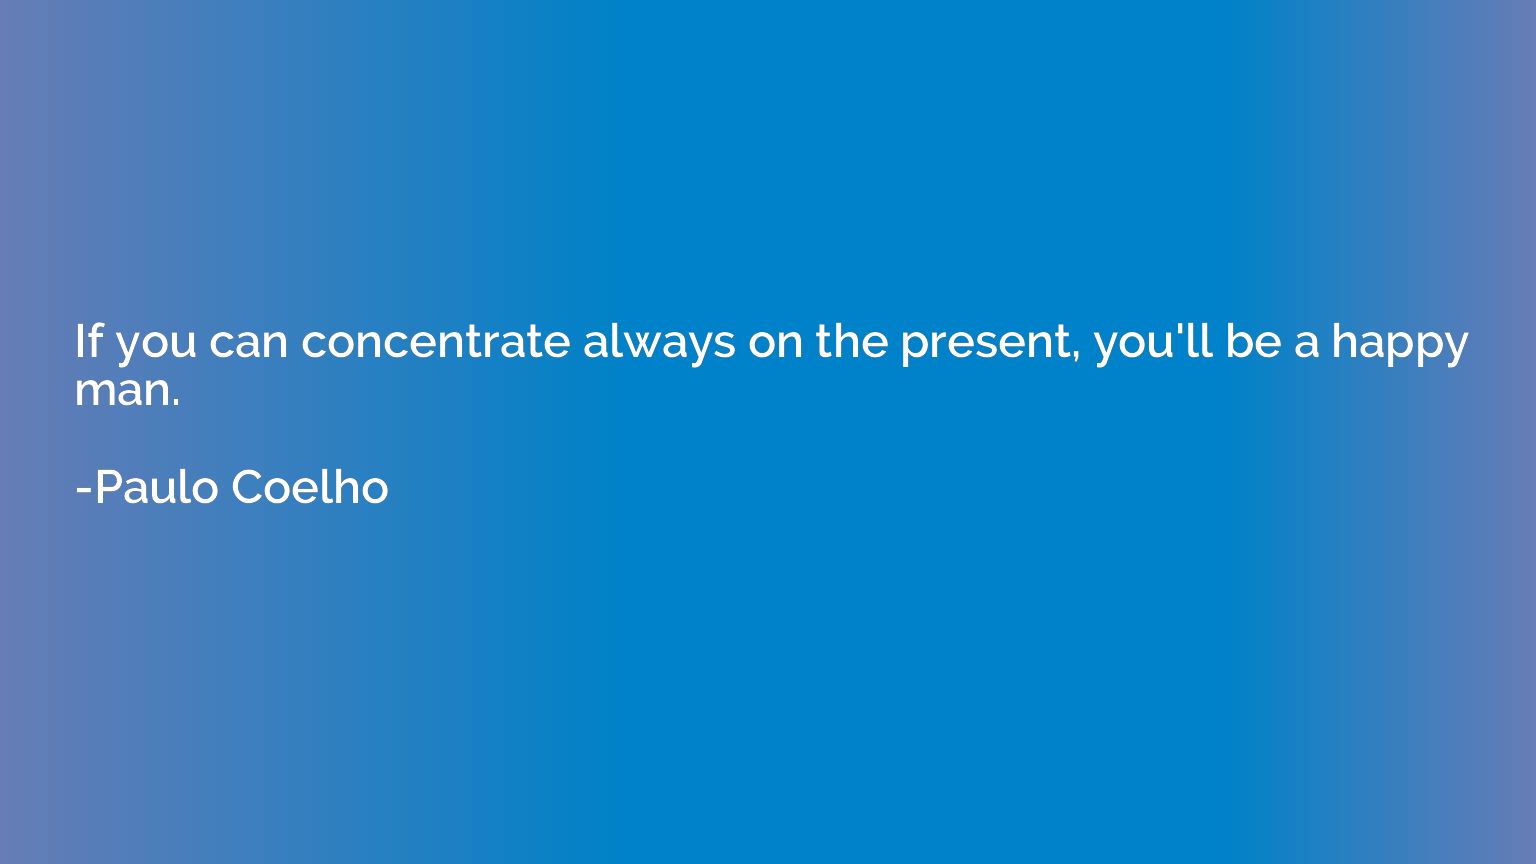 If you can concentrate always on the present, you'll be a ha